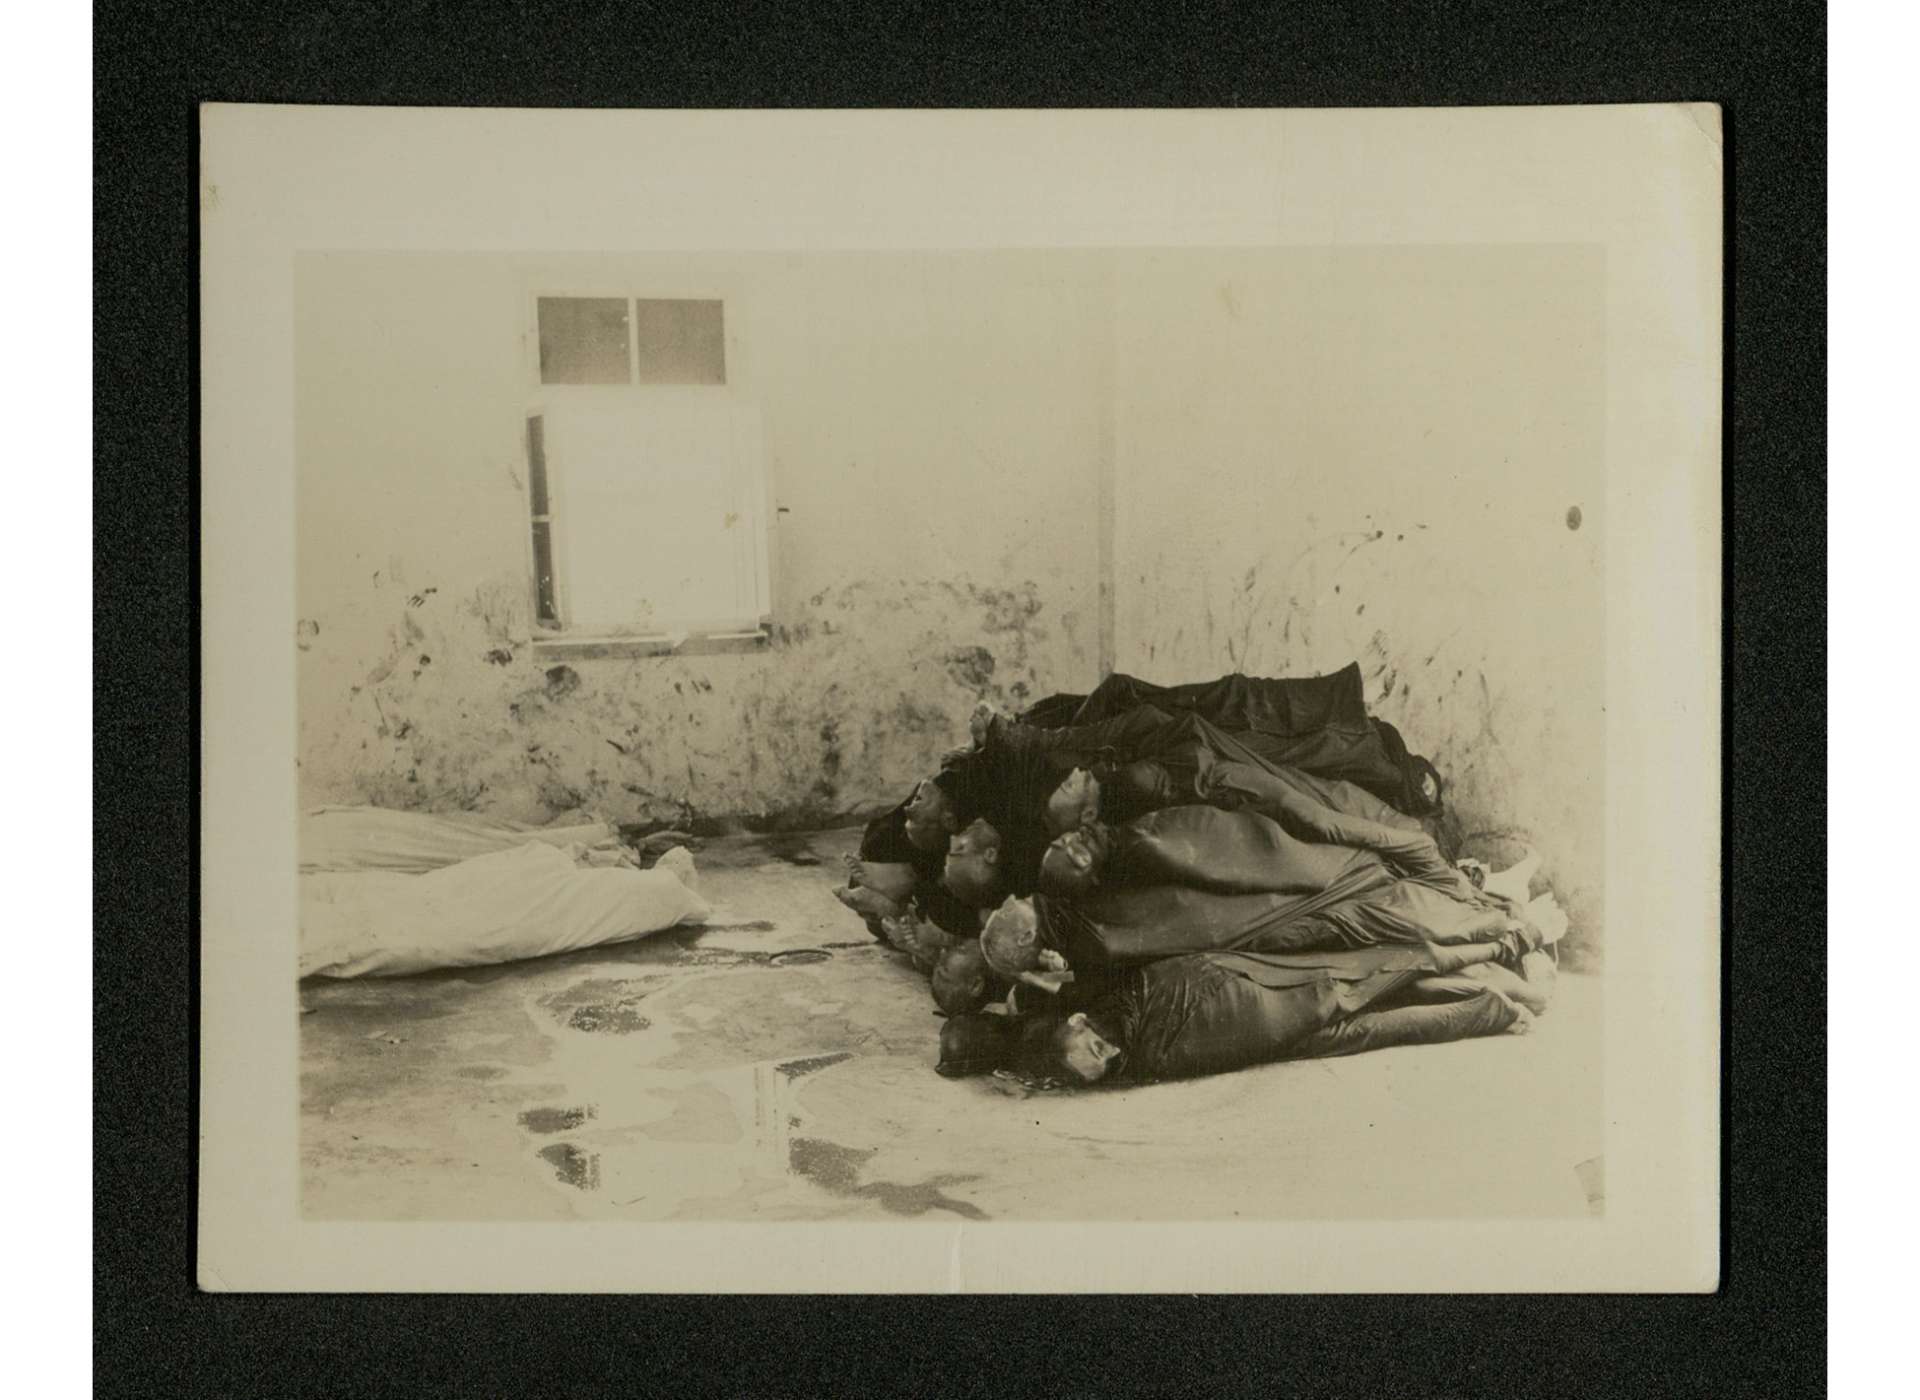 Corpses wrapped and piled in a cement room where blood smears are to be seen on the walls. US Army Signal Corps photo, Gift of the Acosta Family, from the Collection of The National World War II Museum, 2014.057.028.